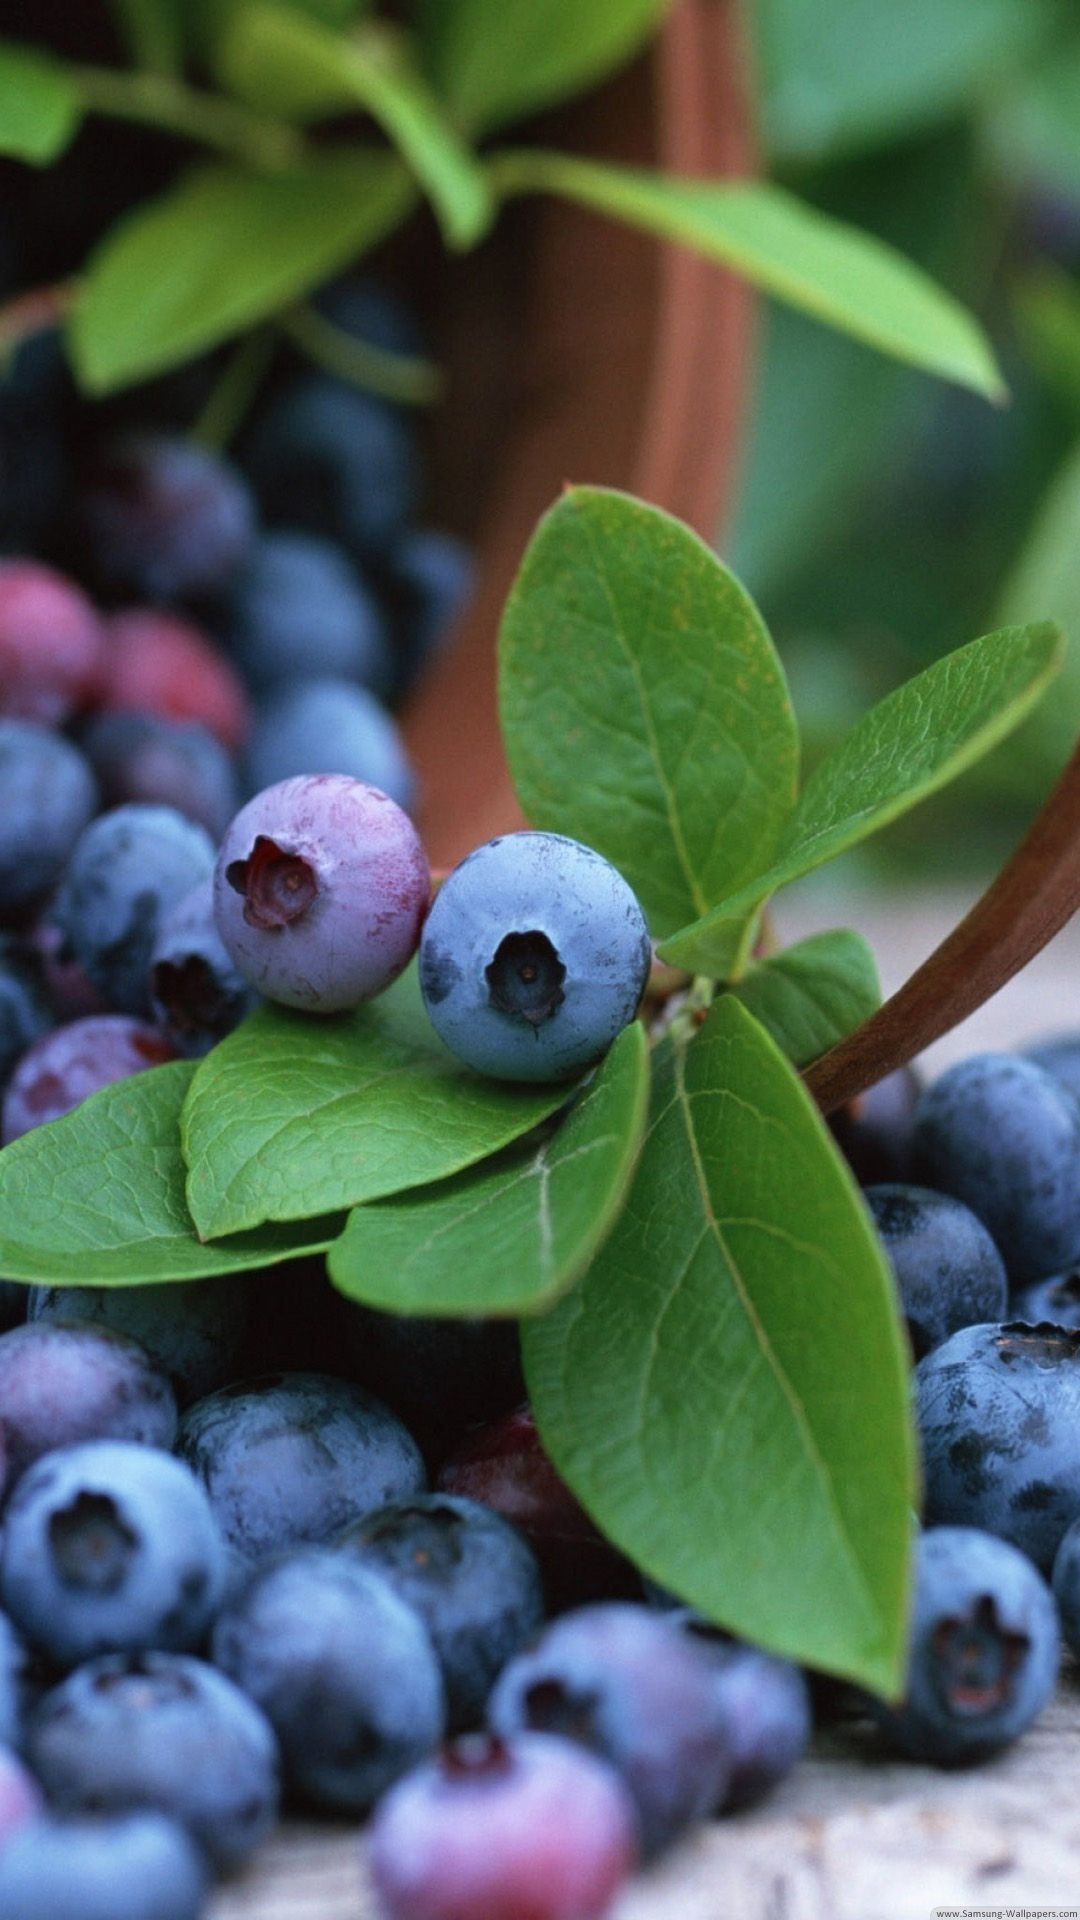 Huckleberry: Whortleberry, The berries of several plants of genus Vaccinium. 1080x1920 Full HD Wallpaper.